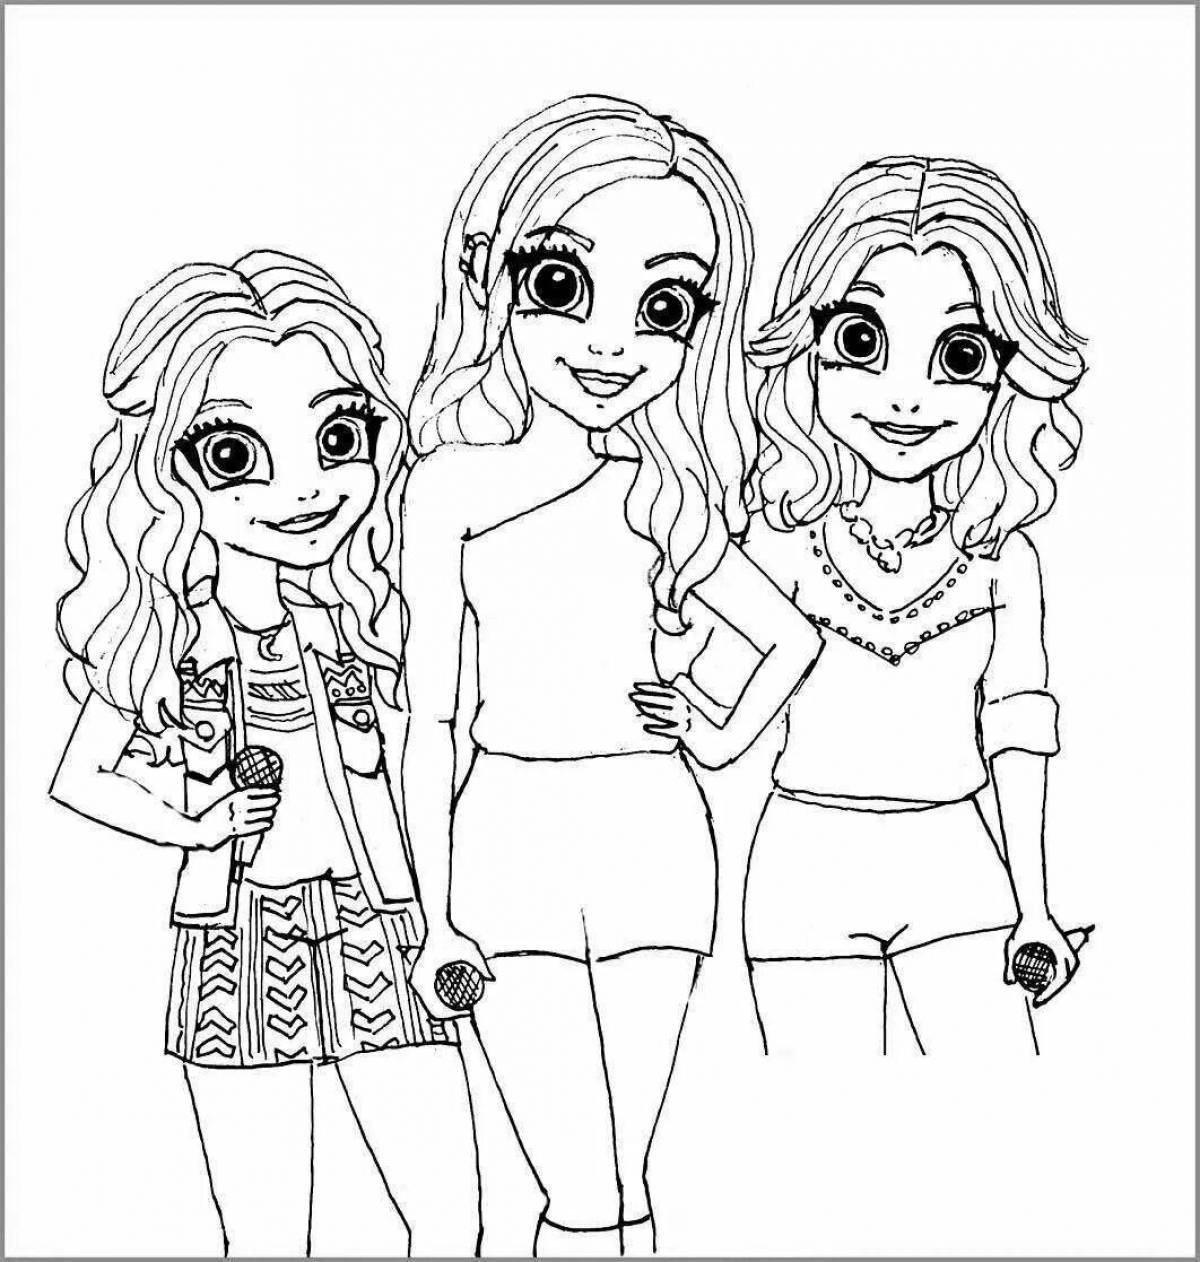 Colorific coloring page for girls 12 years old cool lp